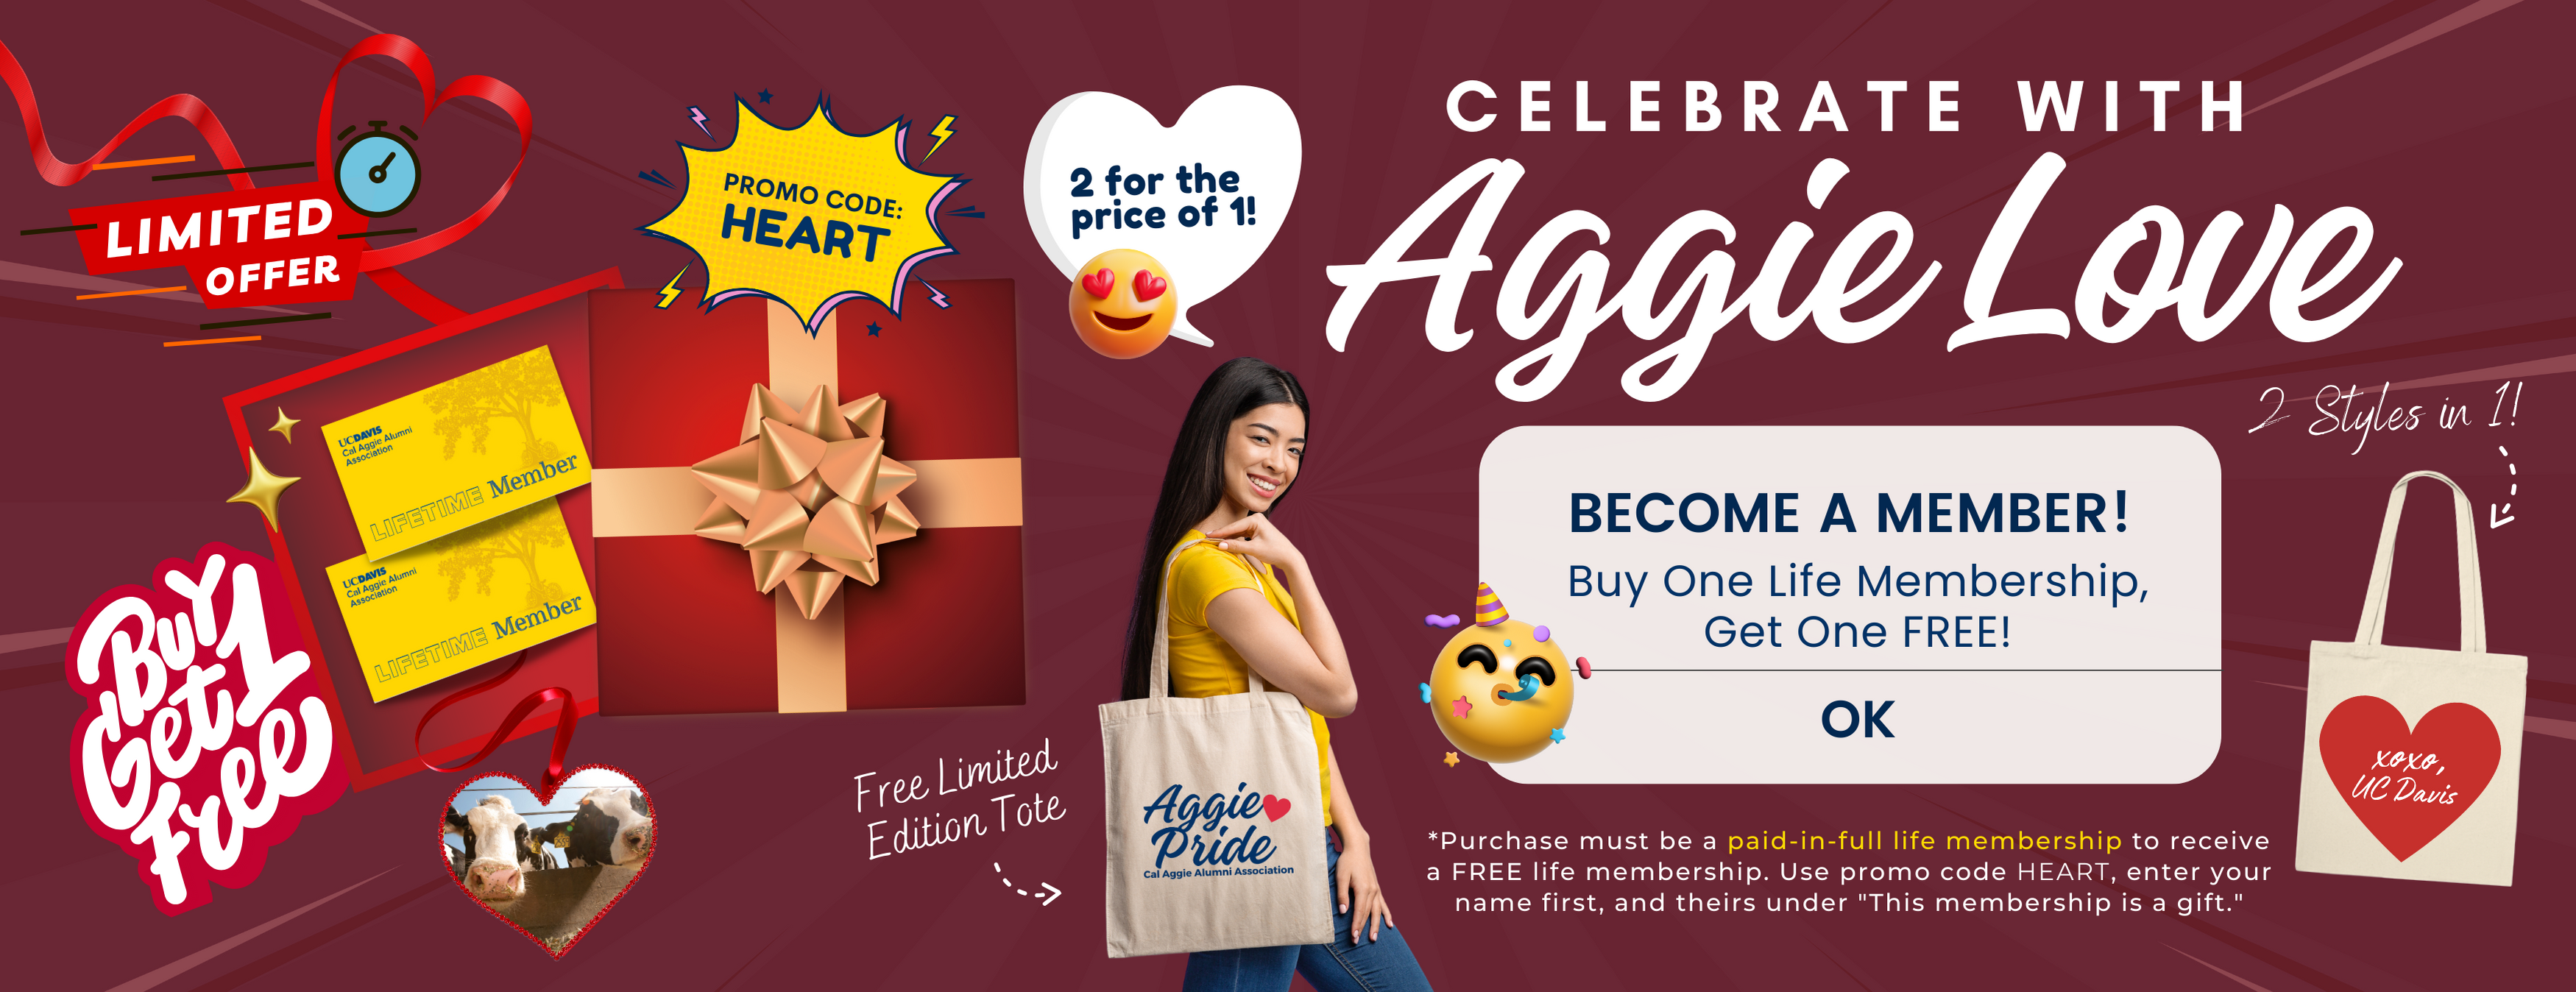 Red background with illustrations that read "Limited offer";, "Buy 1 get 1 free" and a white heading that reads "Celebrate with Aggie Love" and "Buy one life membership, get one free".